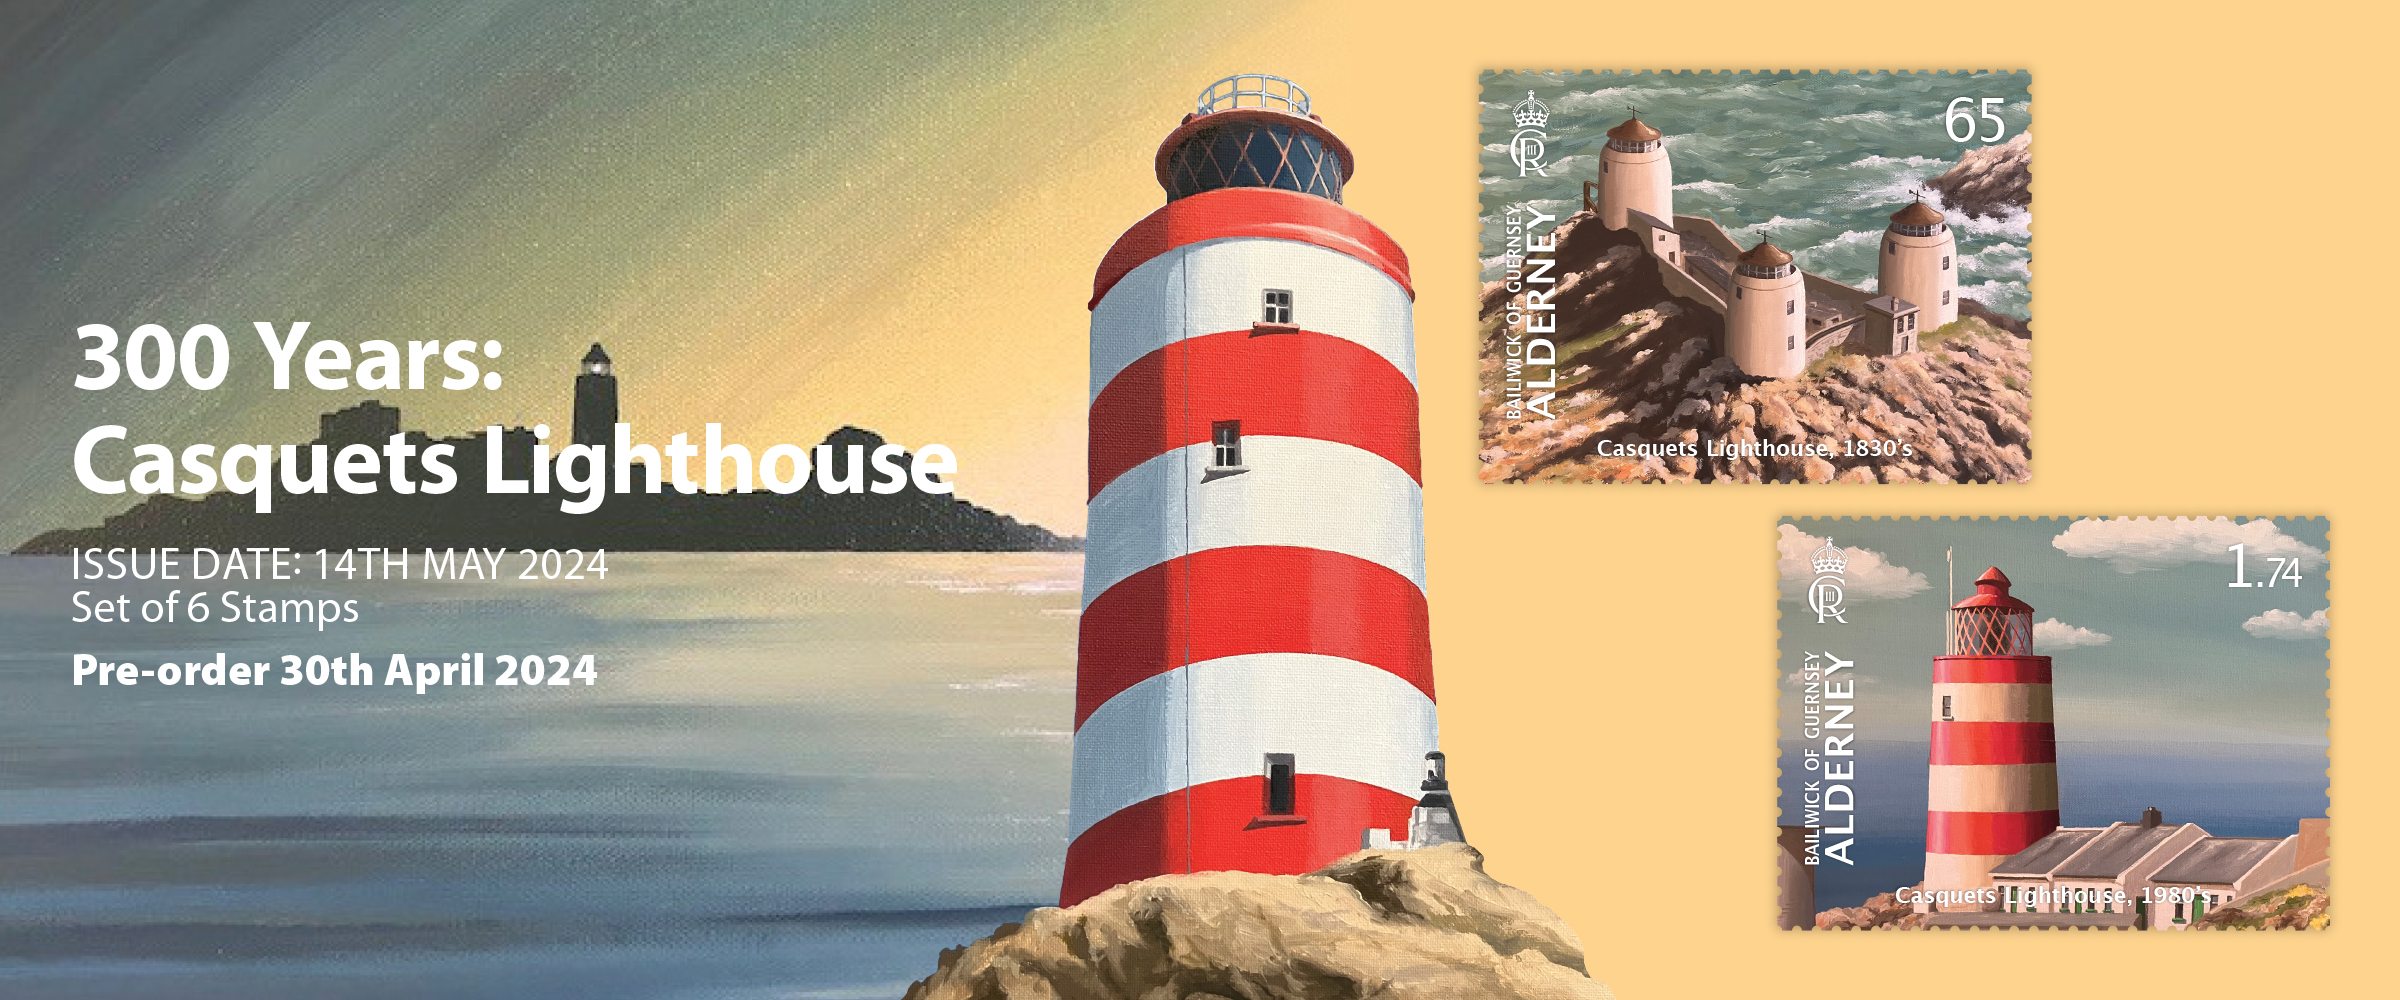 300 Years: Casquets Lighthouse